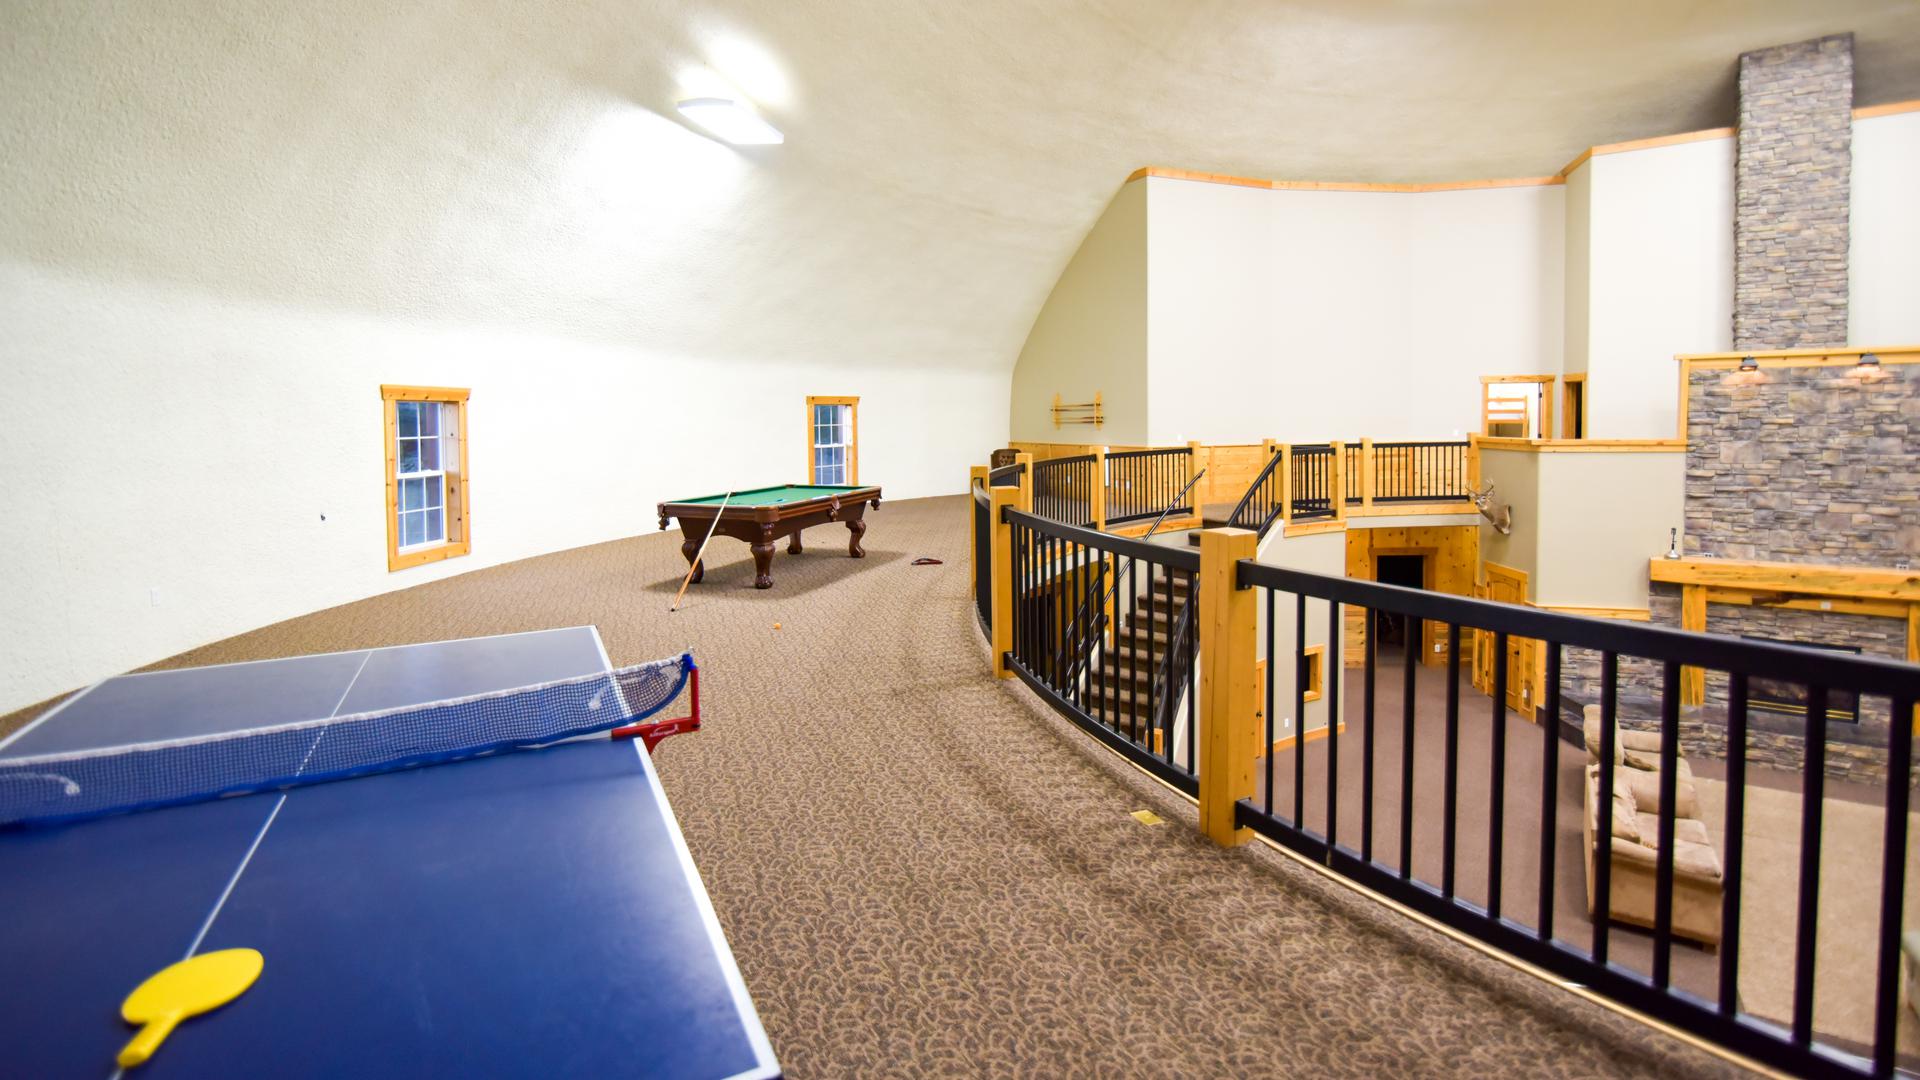 Table tennis, pool, and other upstairs activities.